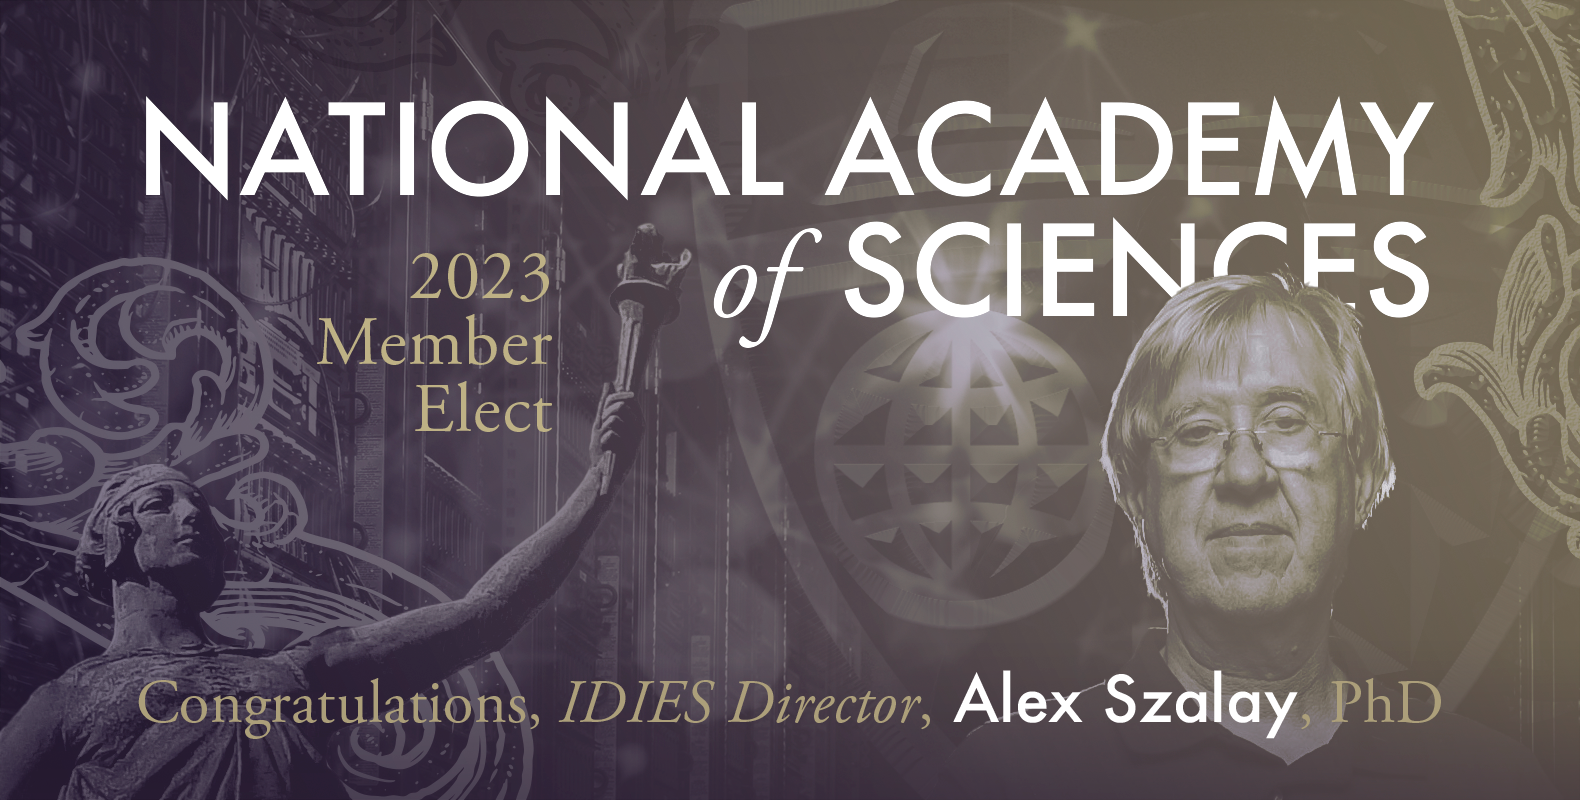 A purple and gold banner image with various university and award iconography. There is a portrait of Alex Szalay superimposed. White text reads National Academy of Sciences 2023 Member Elect.